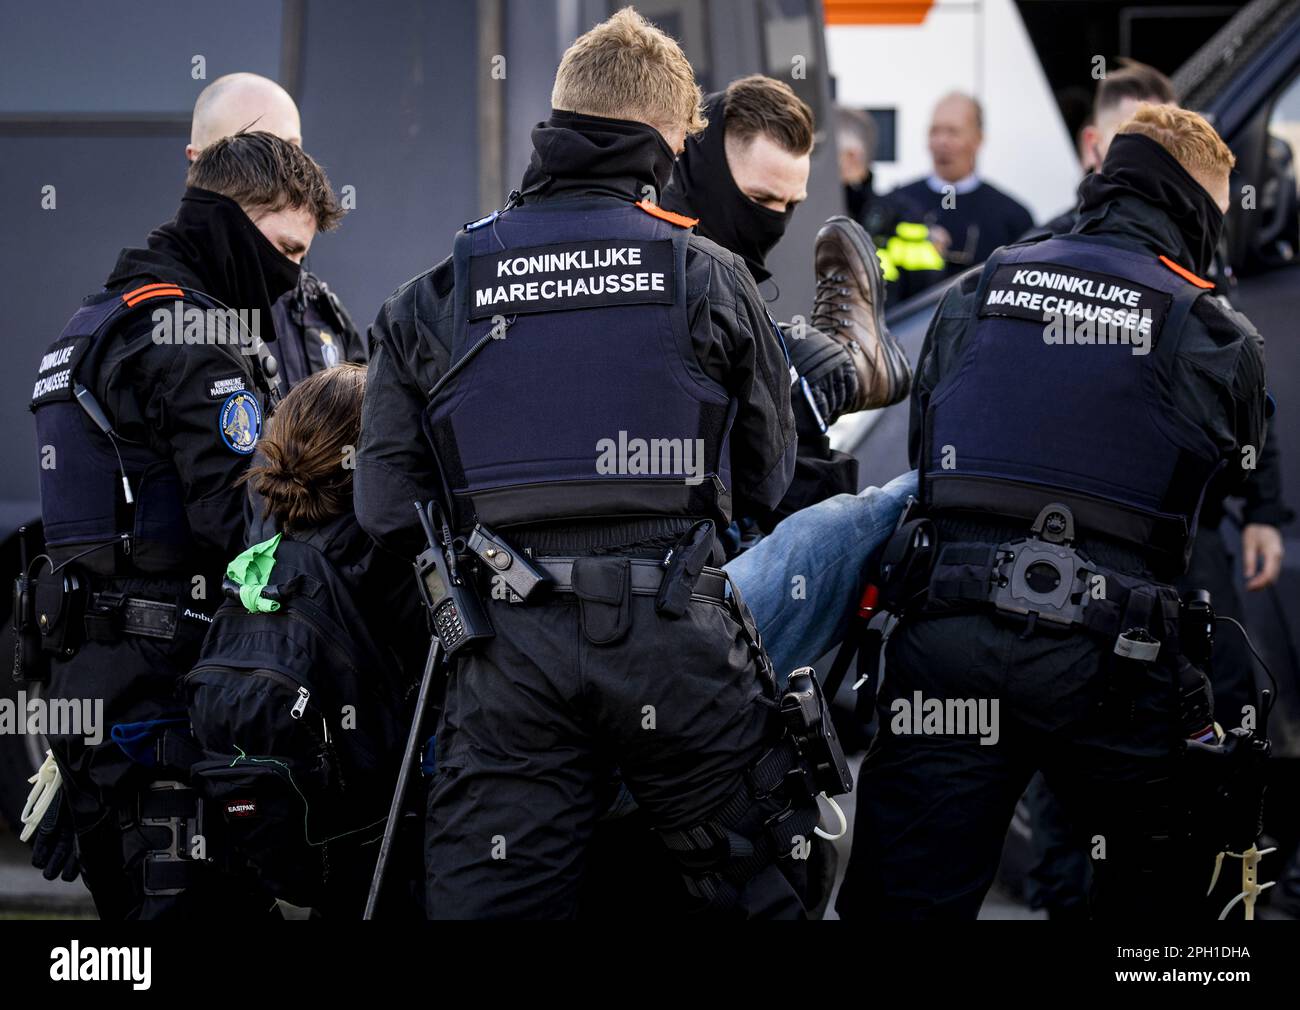 EINDHOVEN - A climate activist from Extinction Rebellion is arrested during an action at Eindhoven Airport. The activists are very concerned about the damage that air traffic causes to the climate. ANP SEM VAN DER WAL netherlands out - belgium out Stock Photo